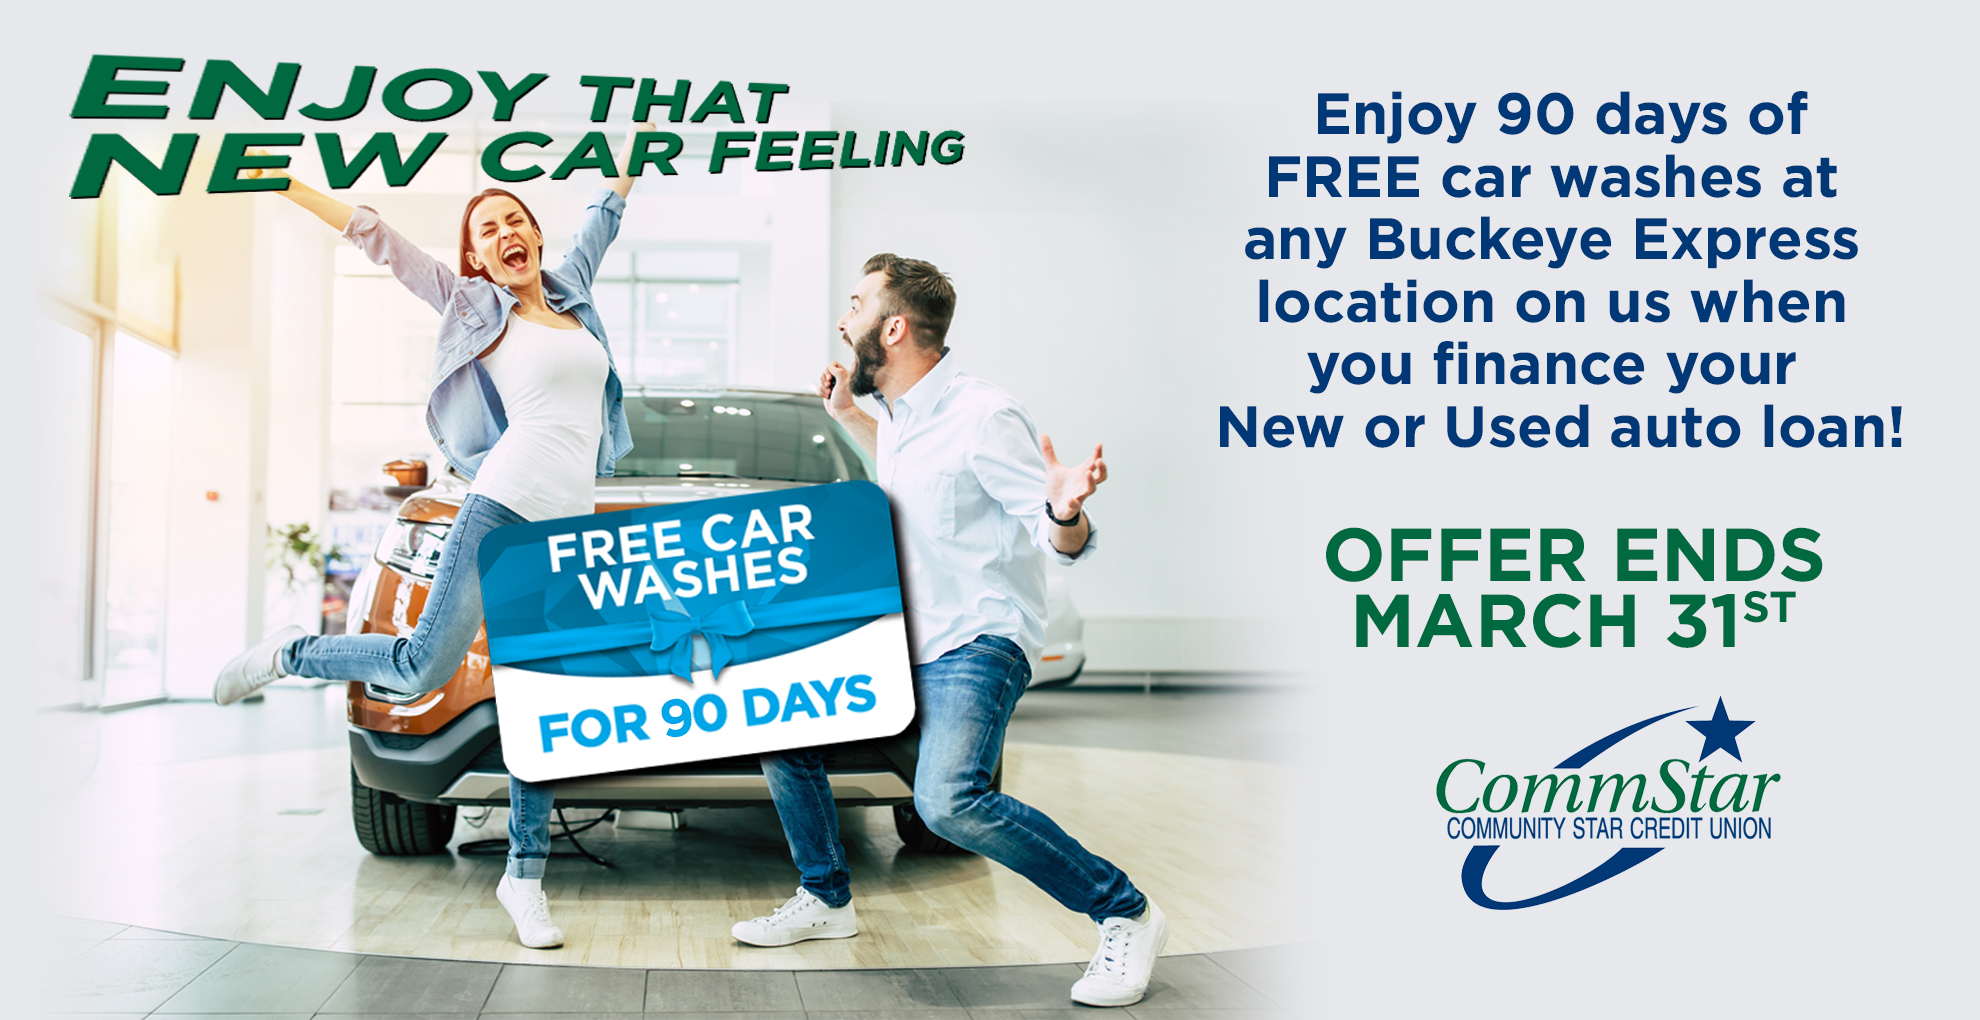 Image: Happy couple celebrating in front of a new car. A superimposed gift card that says "free car washes for 90 days." Enjoy that new car feeling. Enjoy 90 days of free car washes at any Buckeye Express location on us when you finance your new or used auto loan. Offer ends March 31st. CommStar Credit Union logo. Click image to visit offer page.